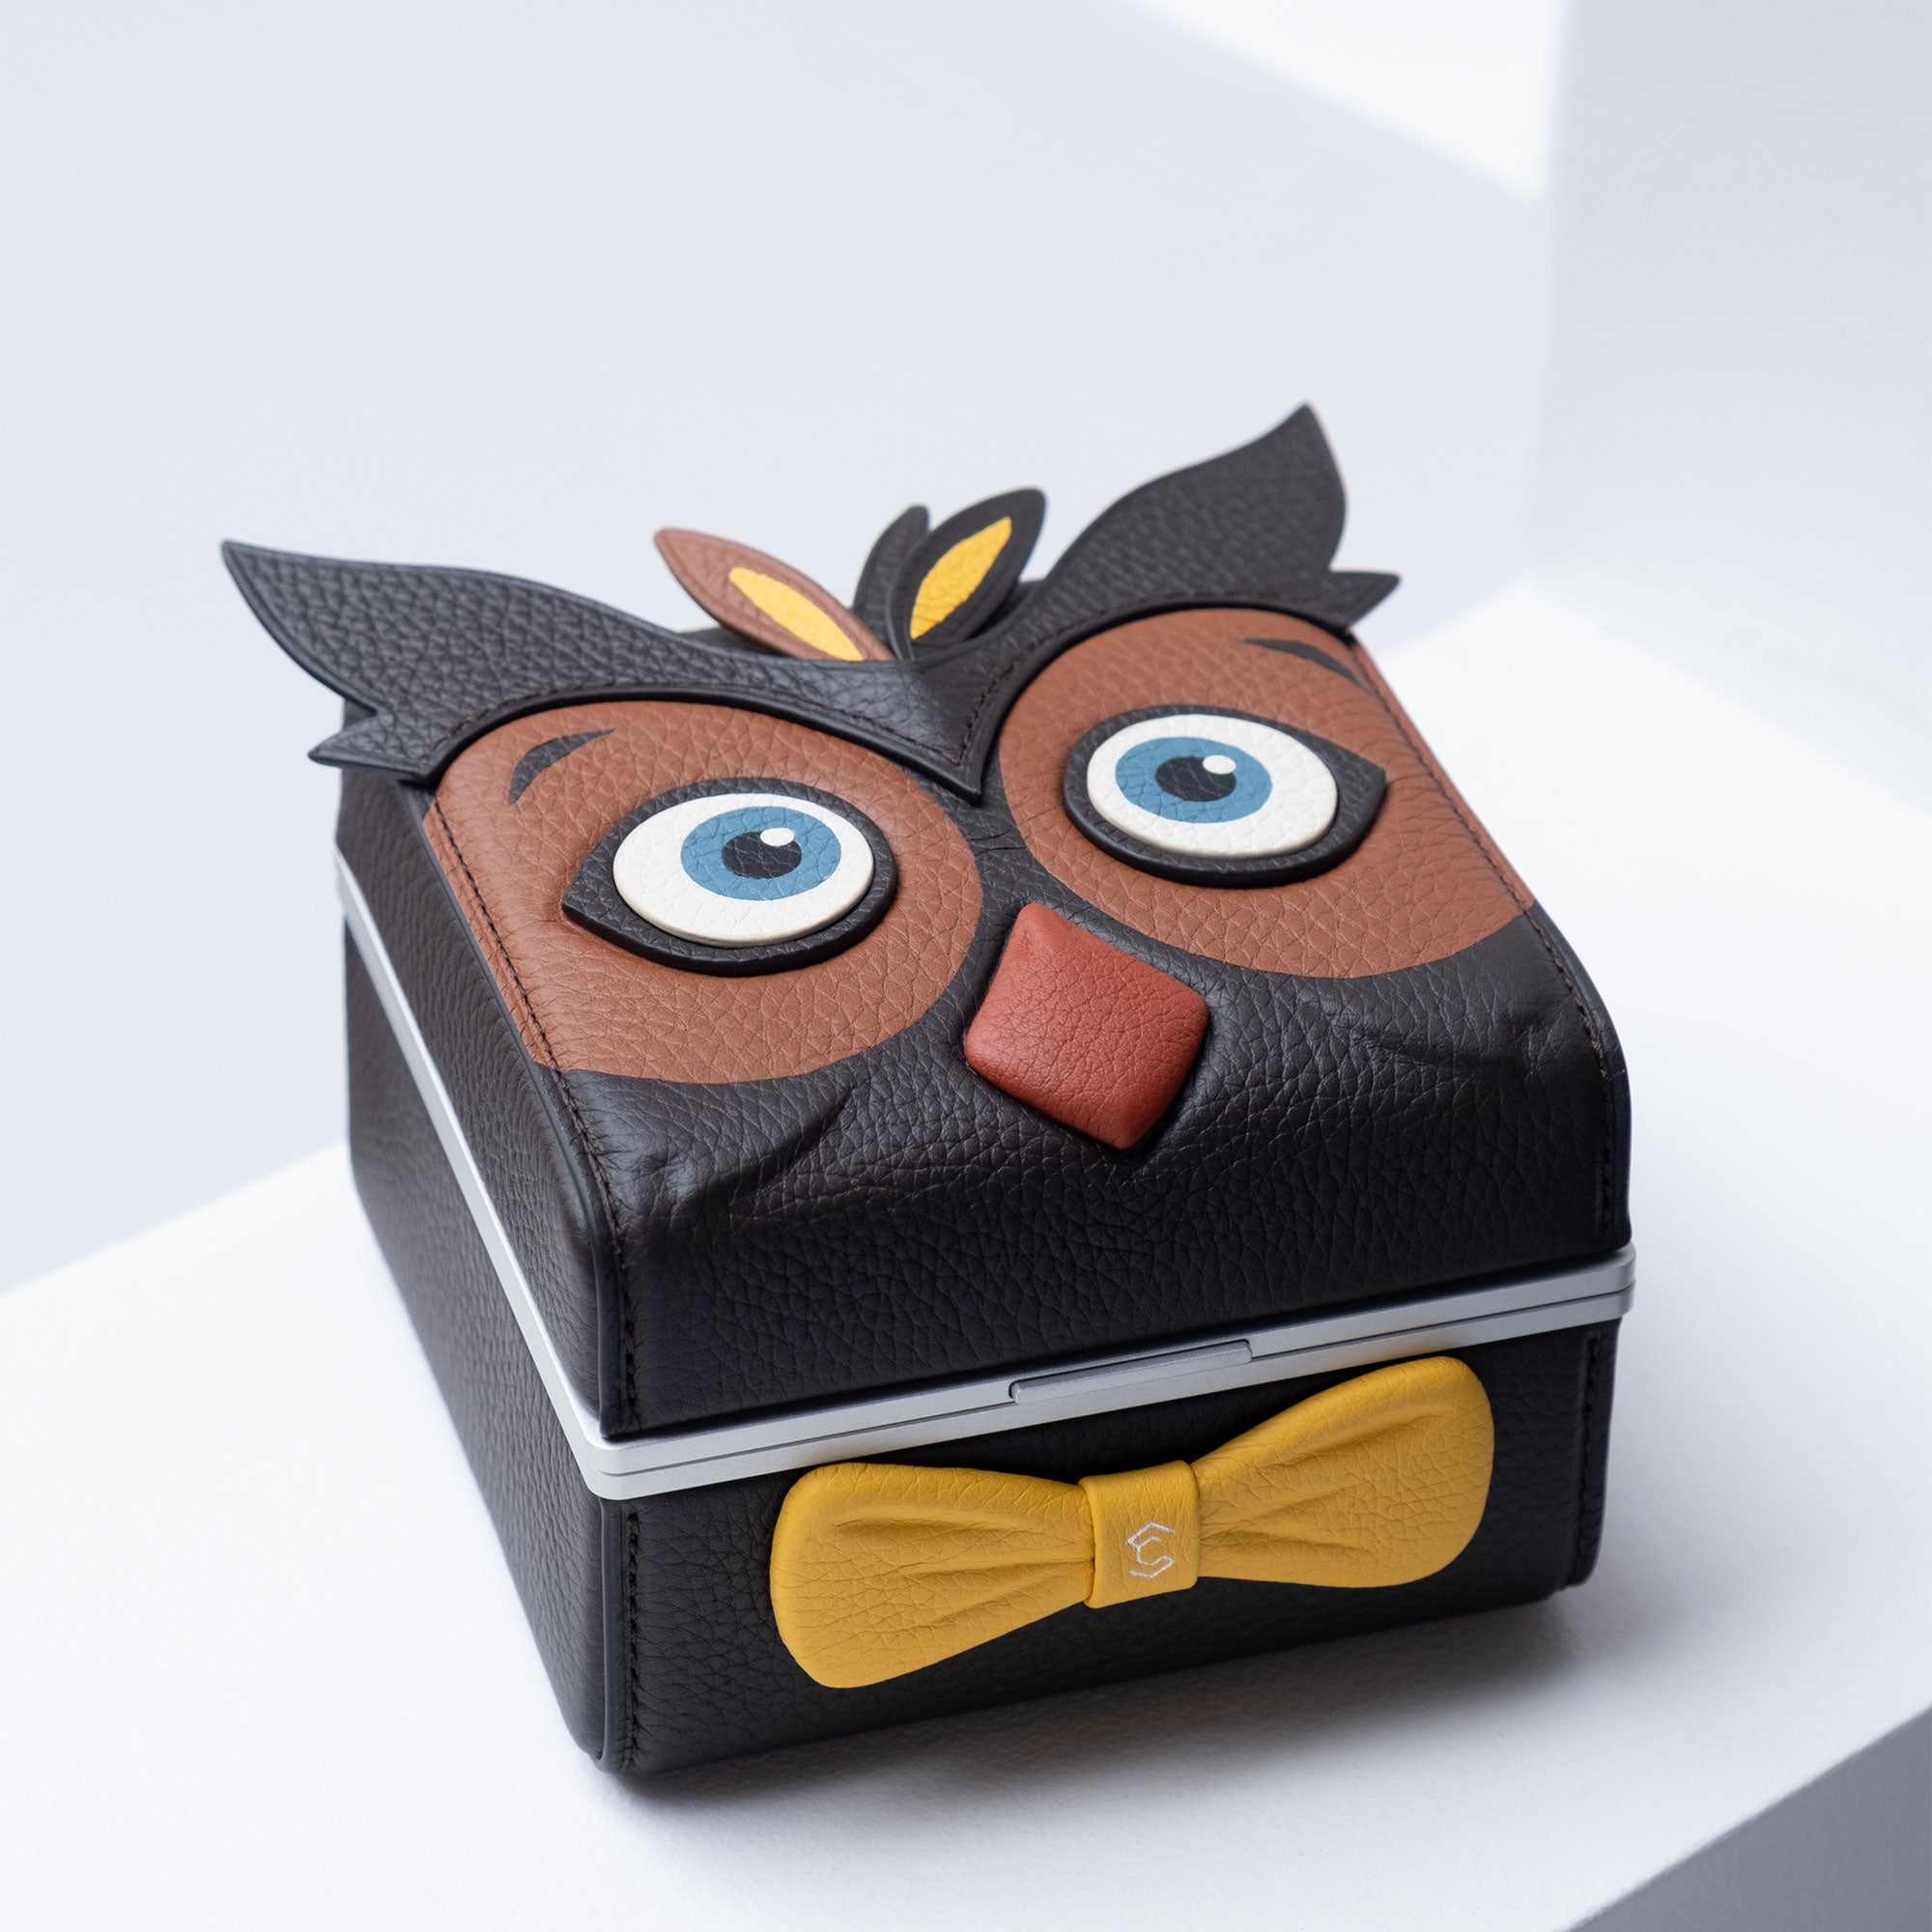 EATON 1 WATCH CASE SPECIAL EDITION OWL - CHARLES SIMON X ARABWATCHGUIDE